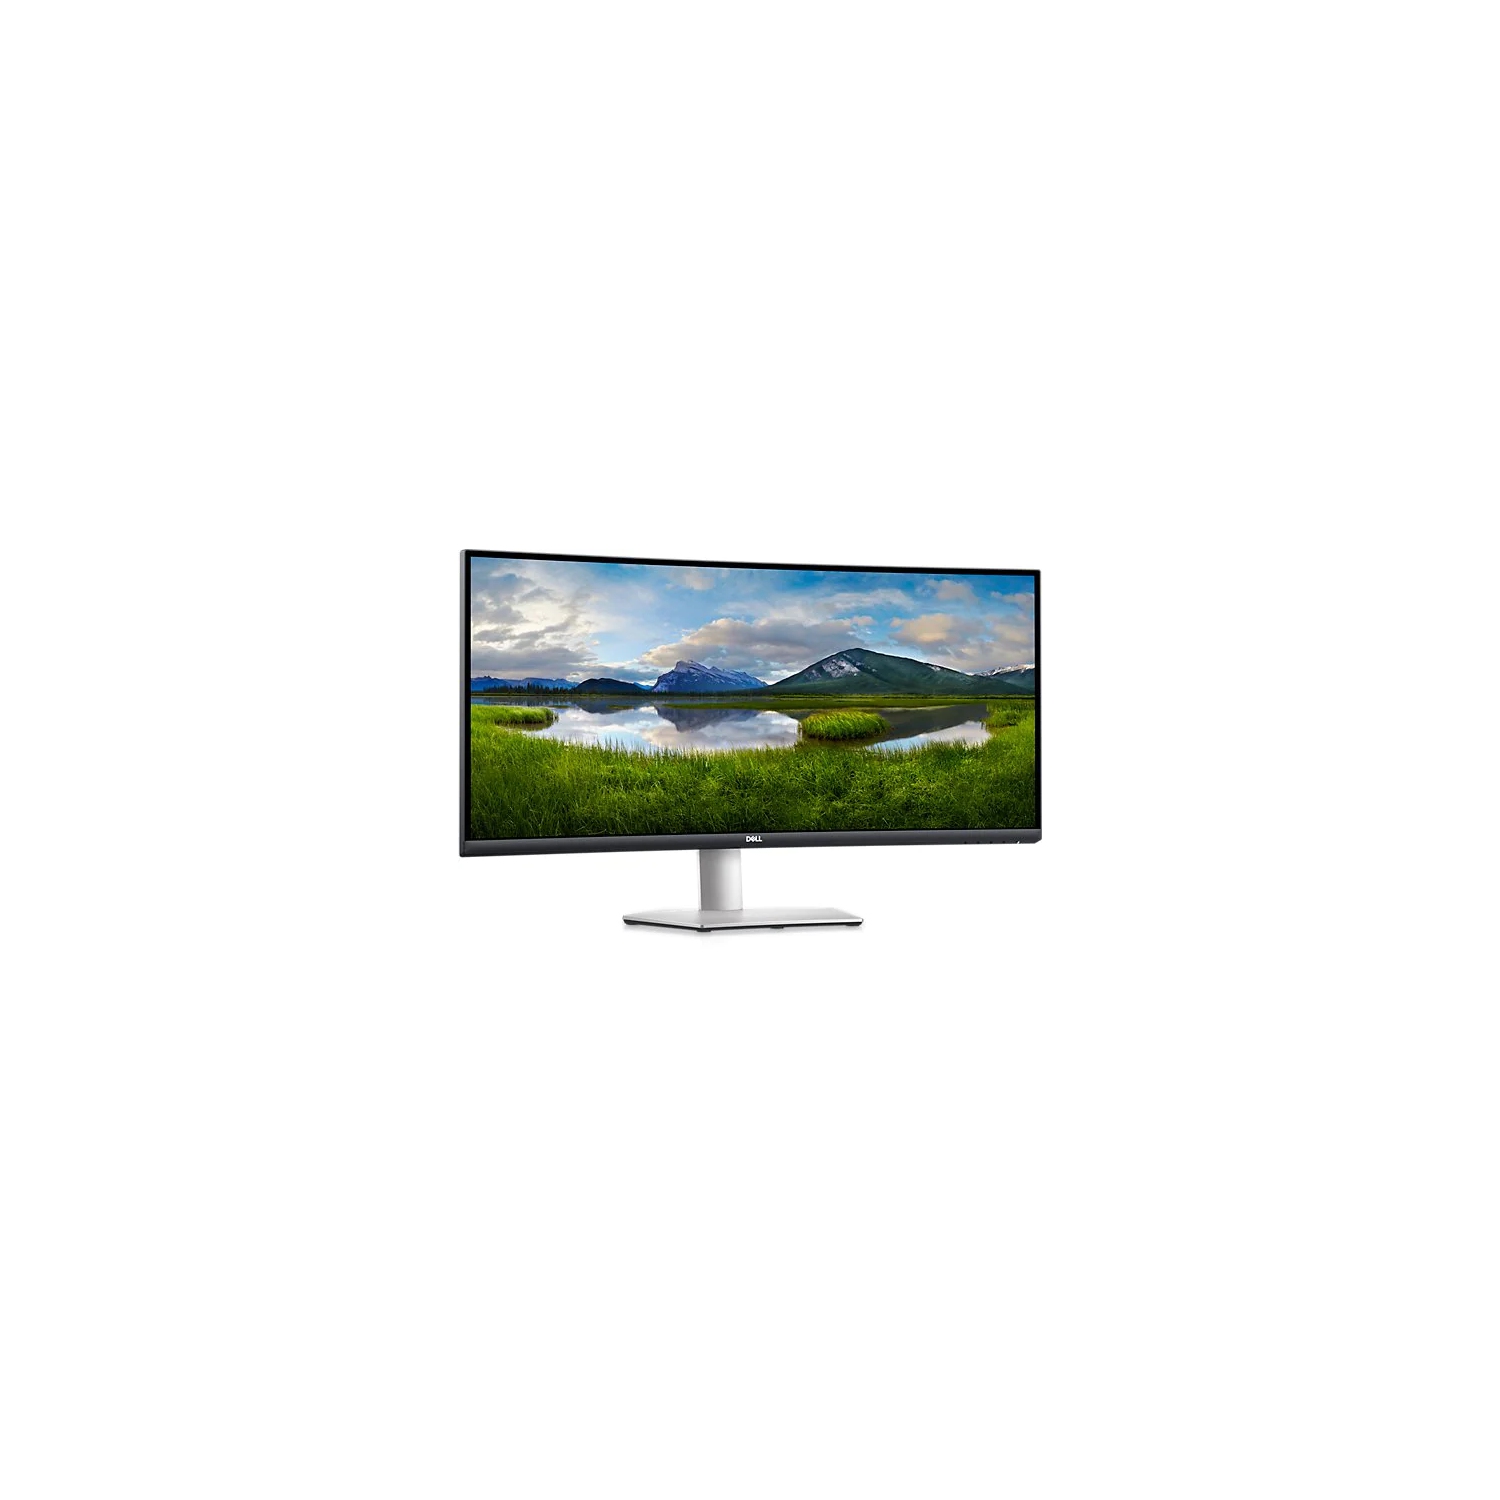 Refurbished (Excellent) - Dell S3422DW Curved Monitor 34" WQHD 3440X1440 at 100Hz, 2X HDMI, DP, Certified Refurbished